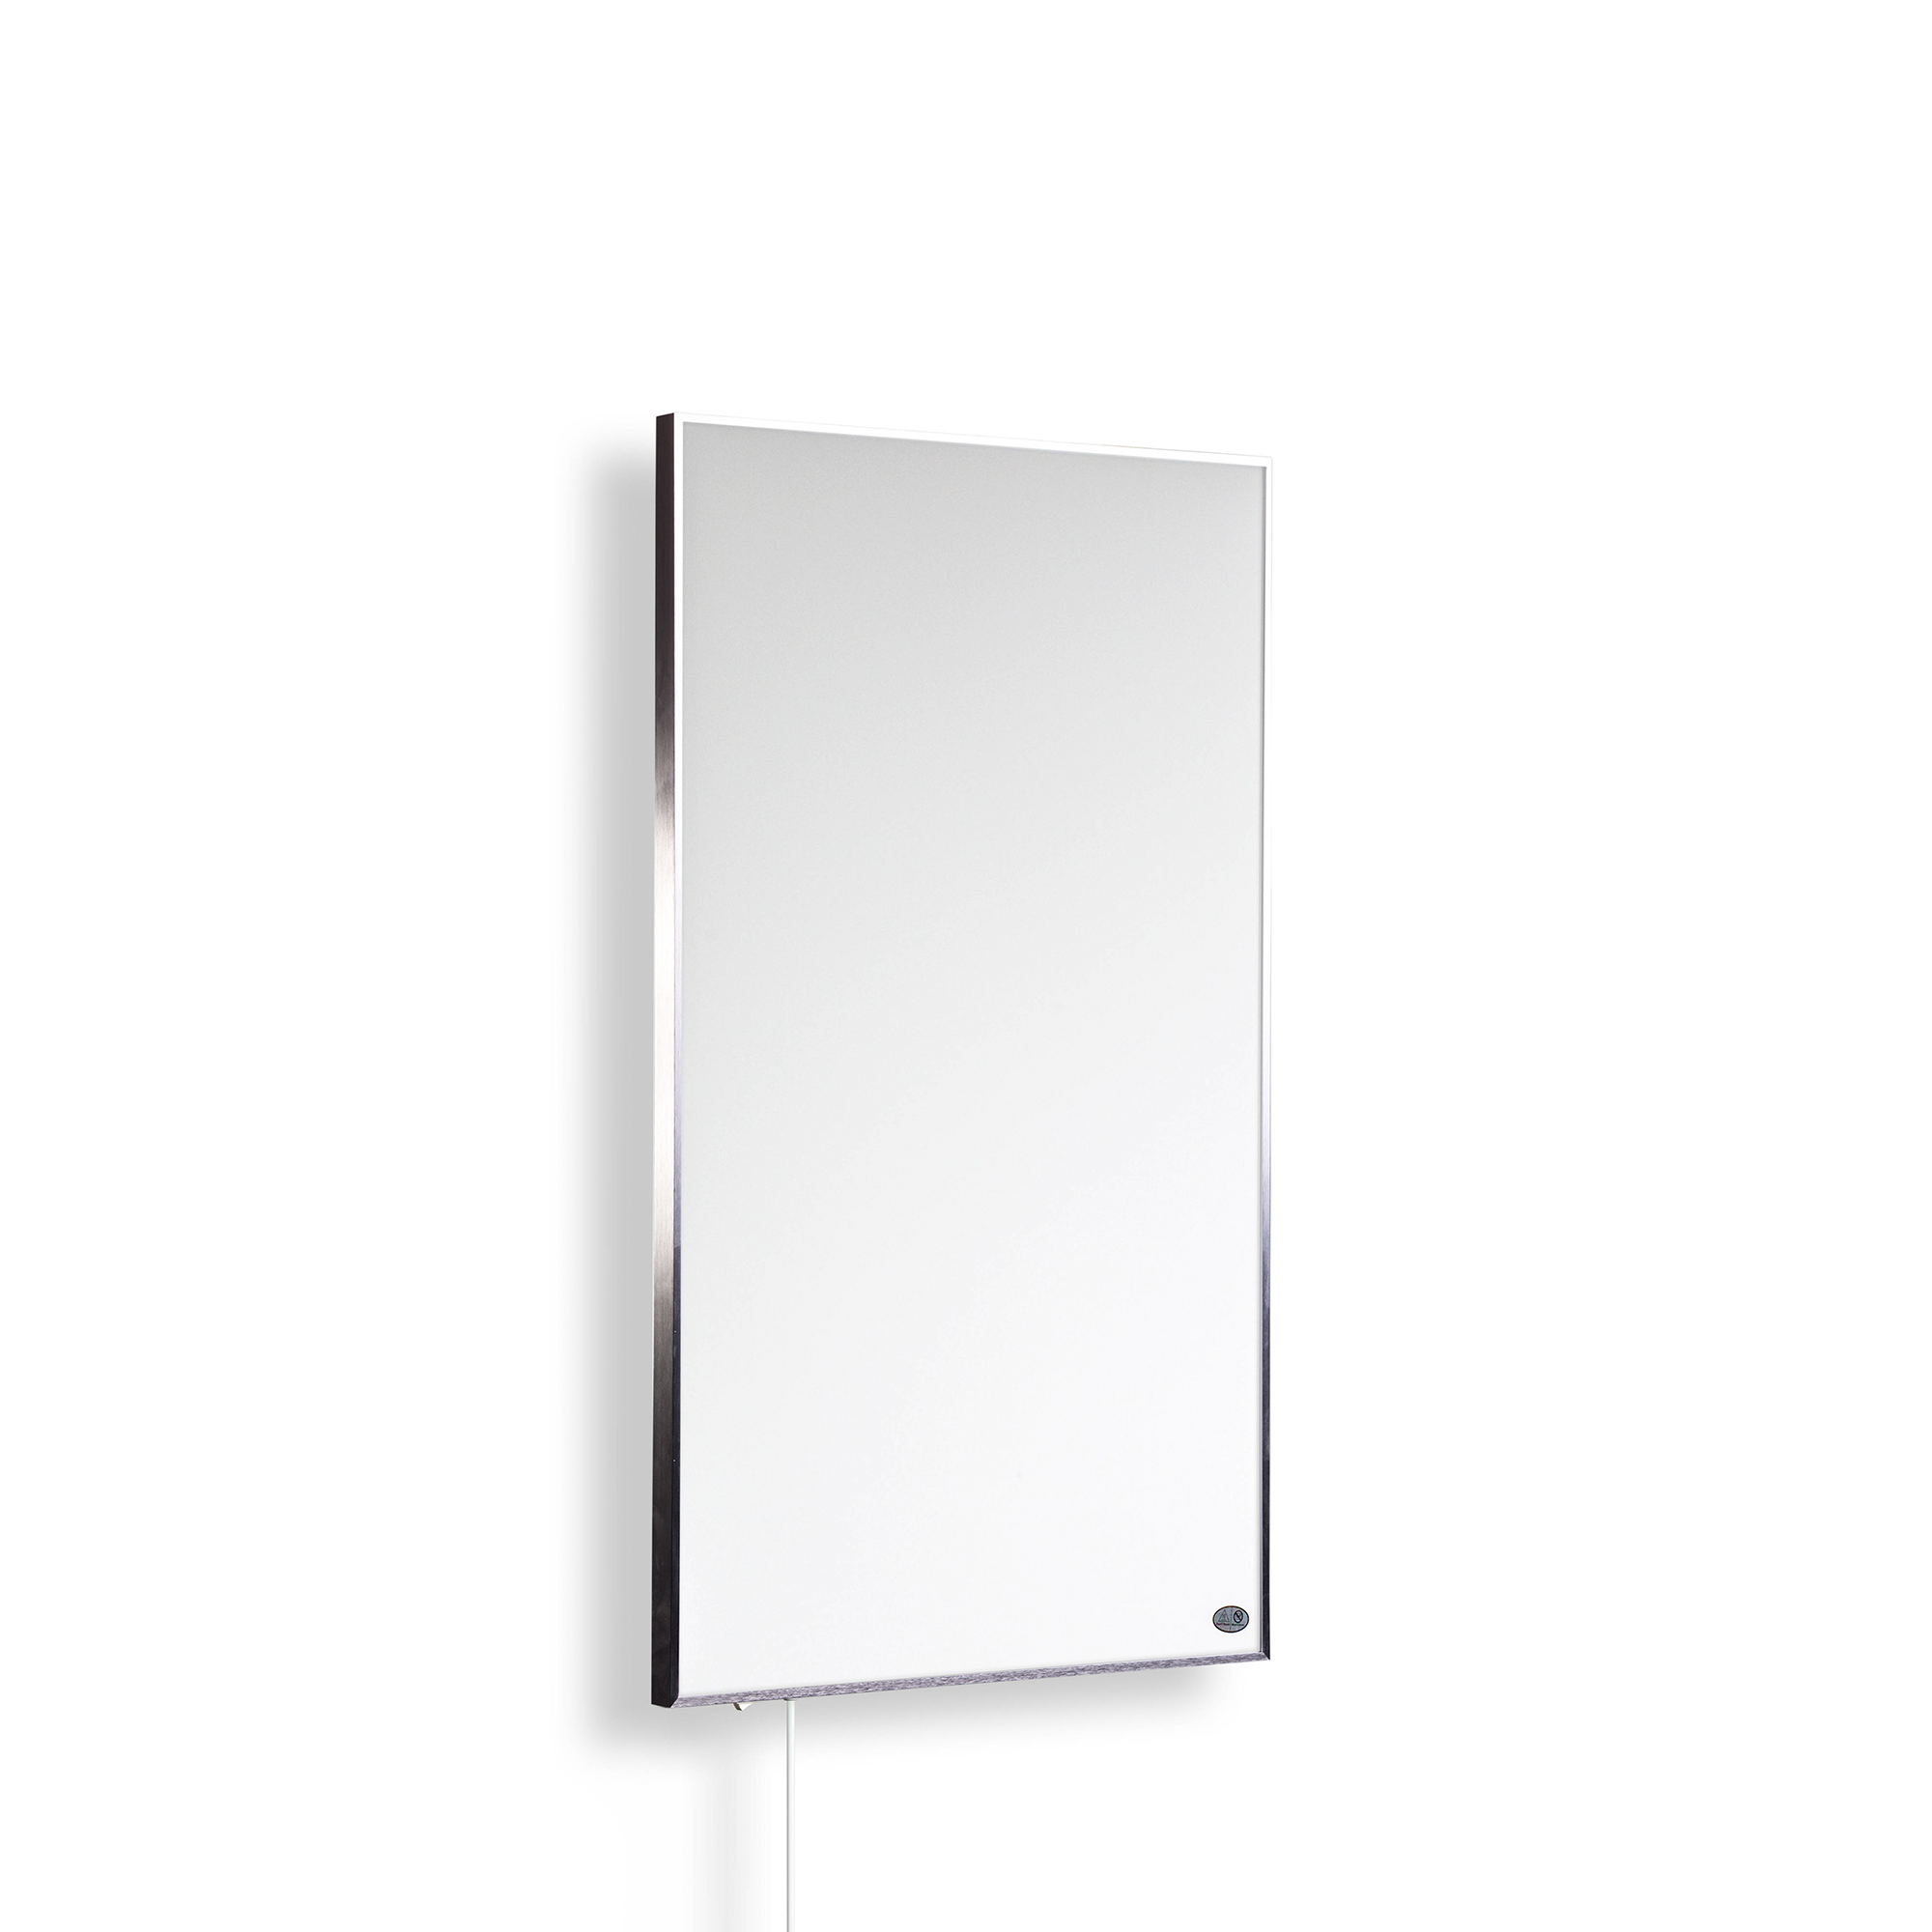 Infrarotheizung 'E-Serie' silbern 800 W + product picture